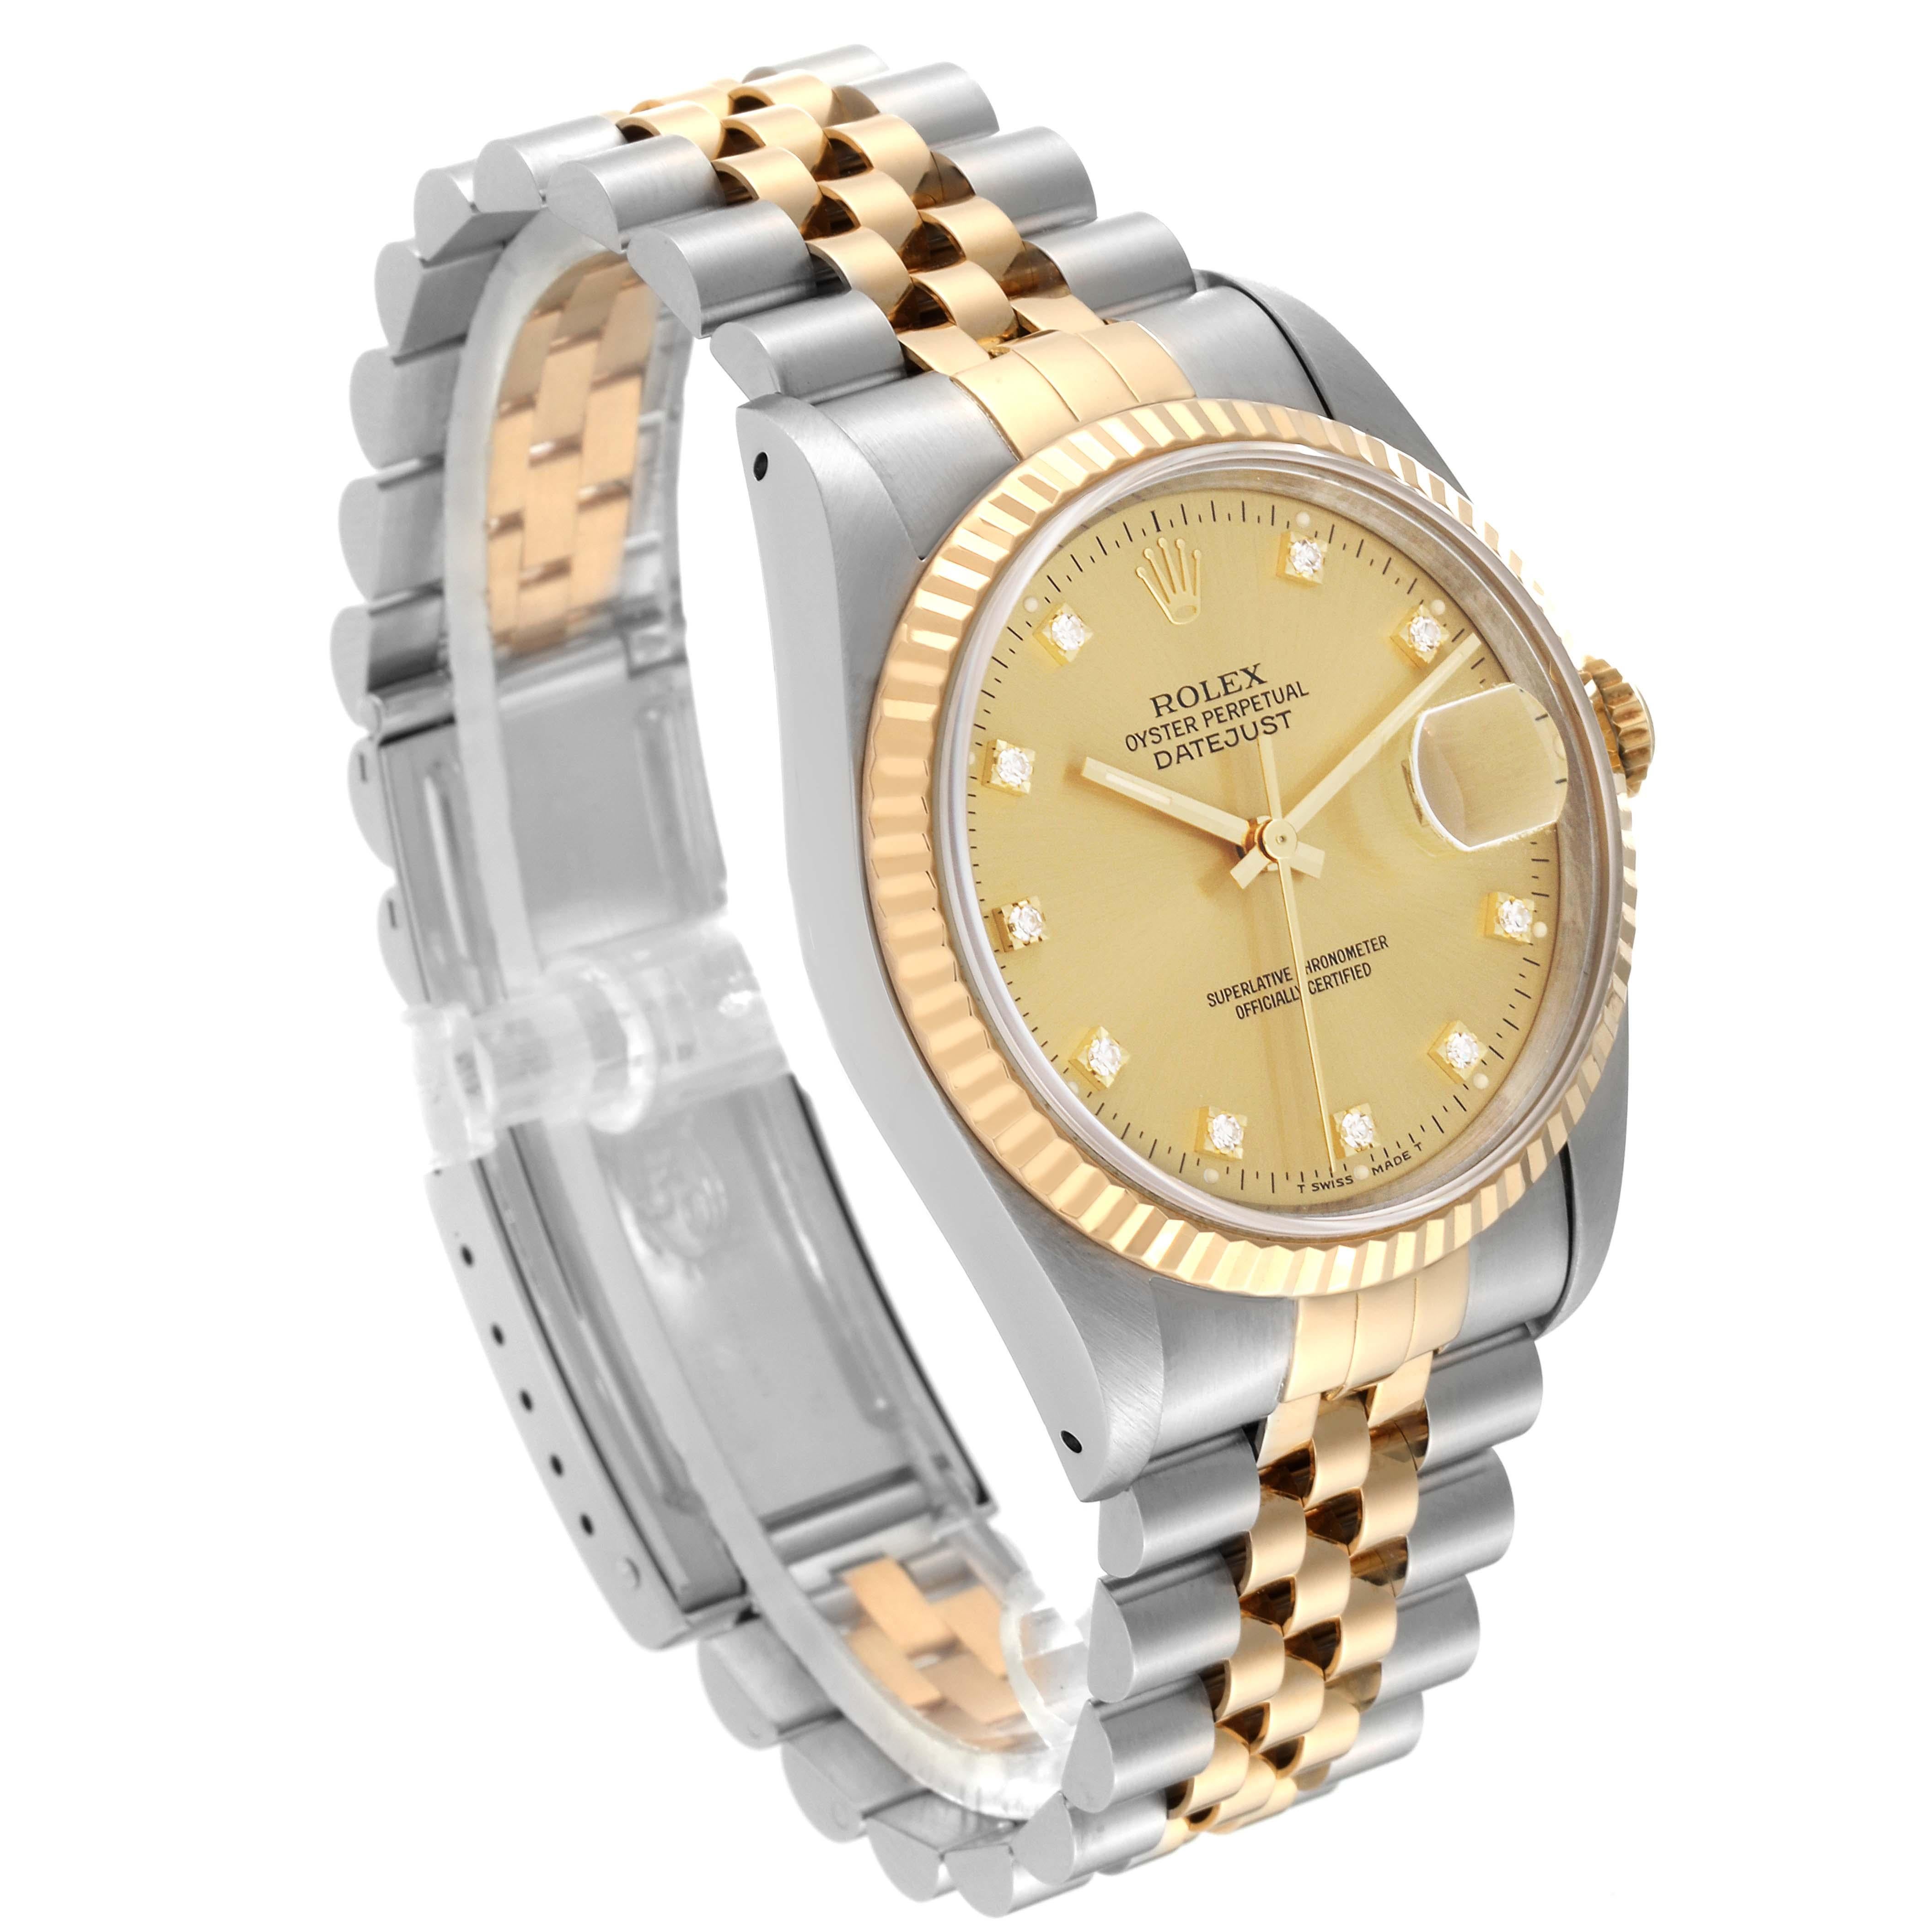 Rolex Datejust Champagne Diamond Dial Steel Yellow Gold Mens Watch 16233 For Sale 3